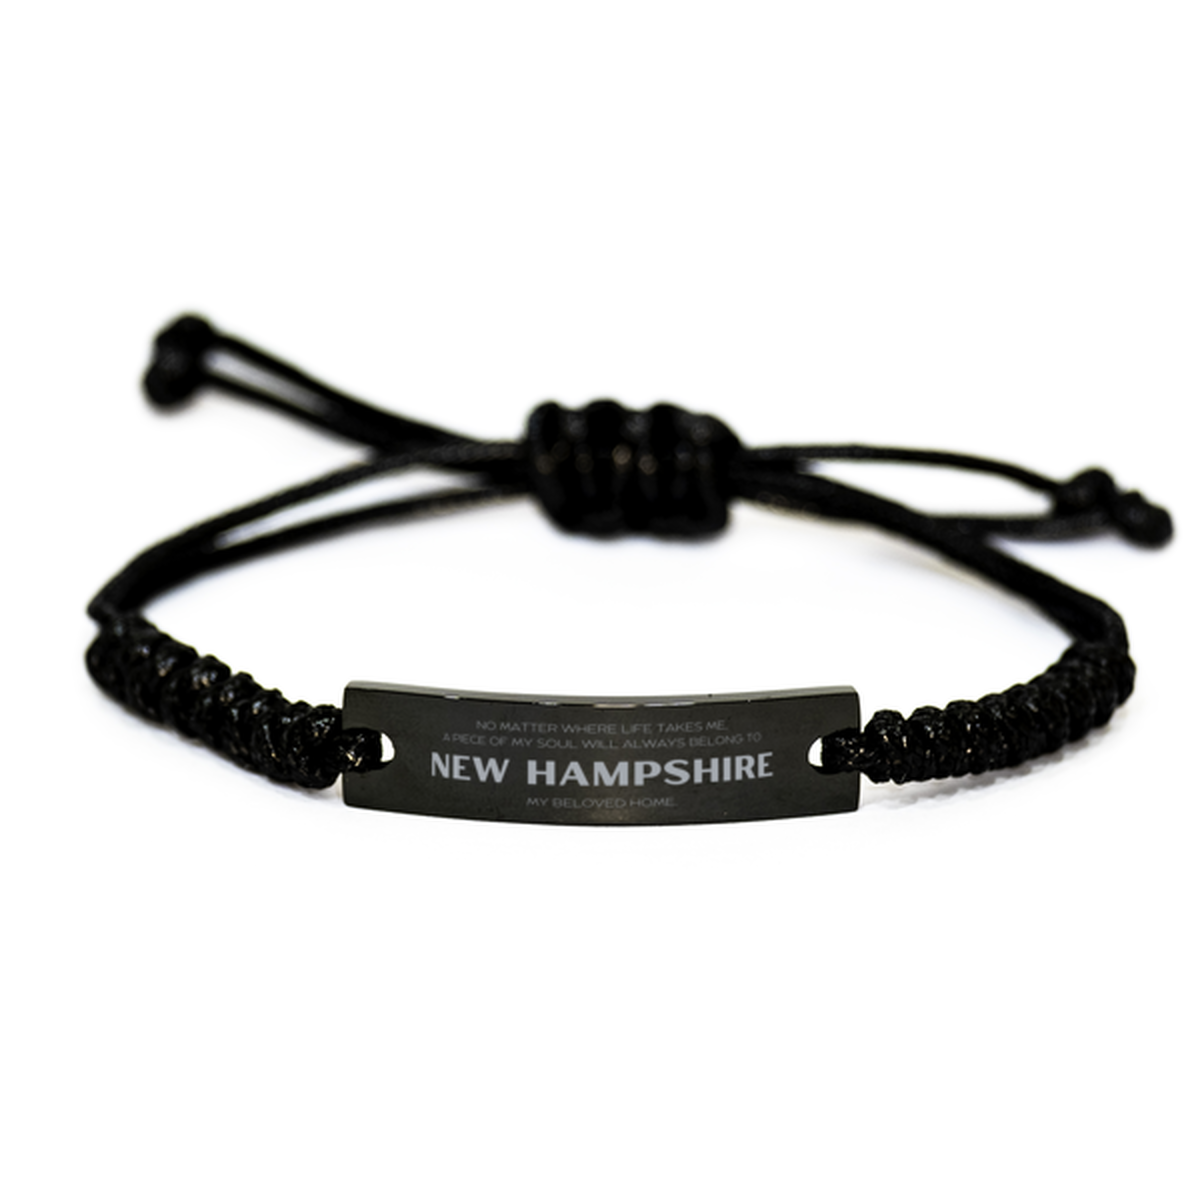 Love New Hampshire State Gifts, My soul will always belong to New Hampshire, Proud Black Rope Bracelet, Birthday Unique Gifts For New Hampshire Men, Women, Friends